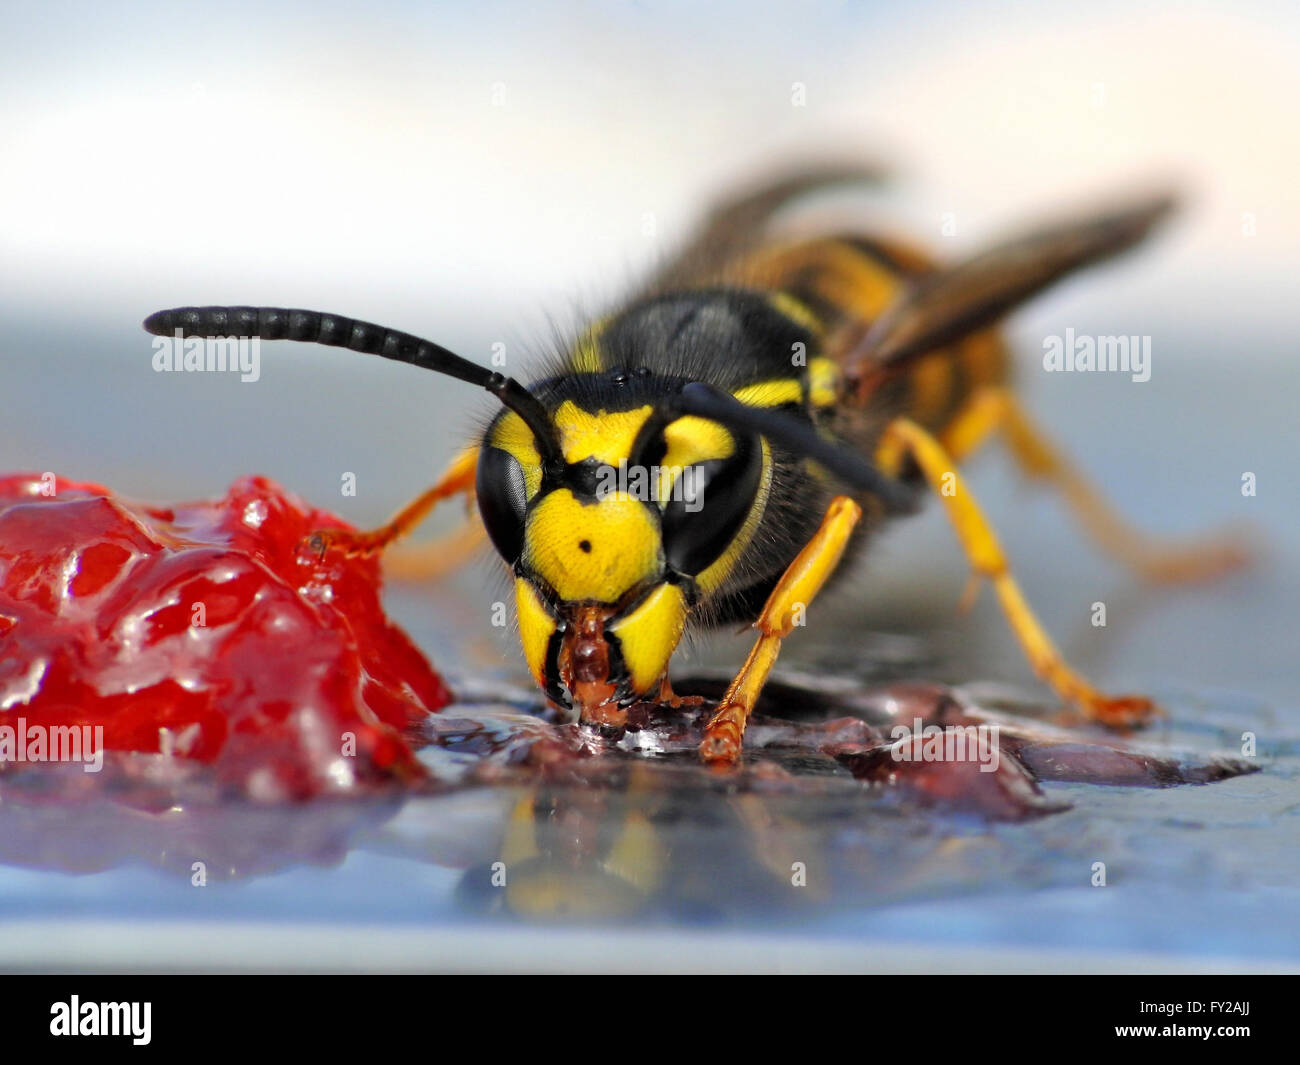 A close-up of a wasp eating jelly. Stock Photo